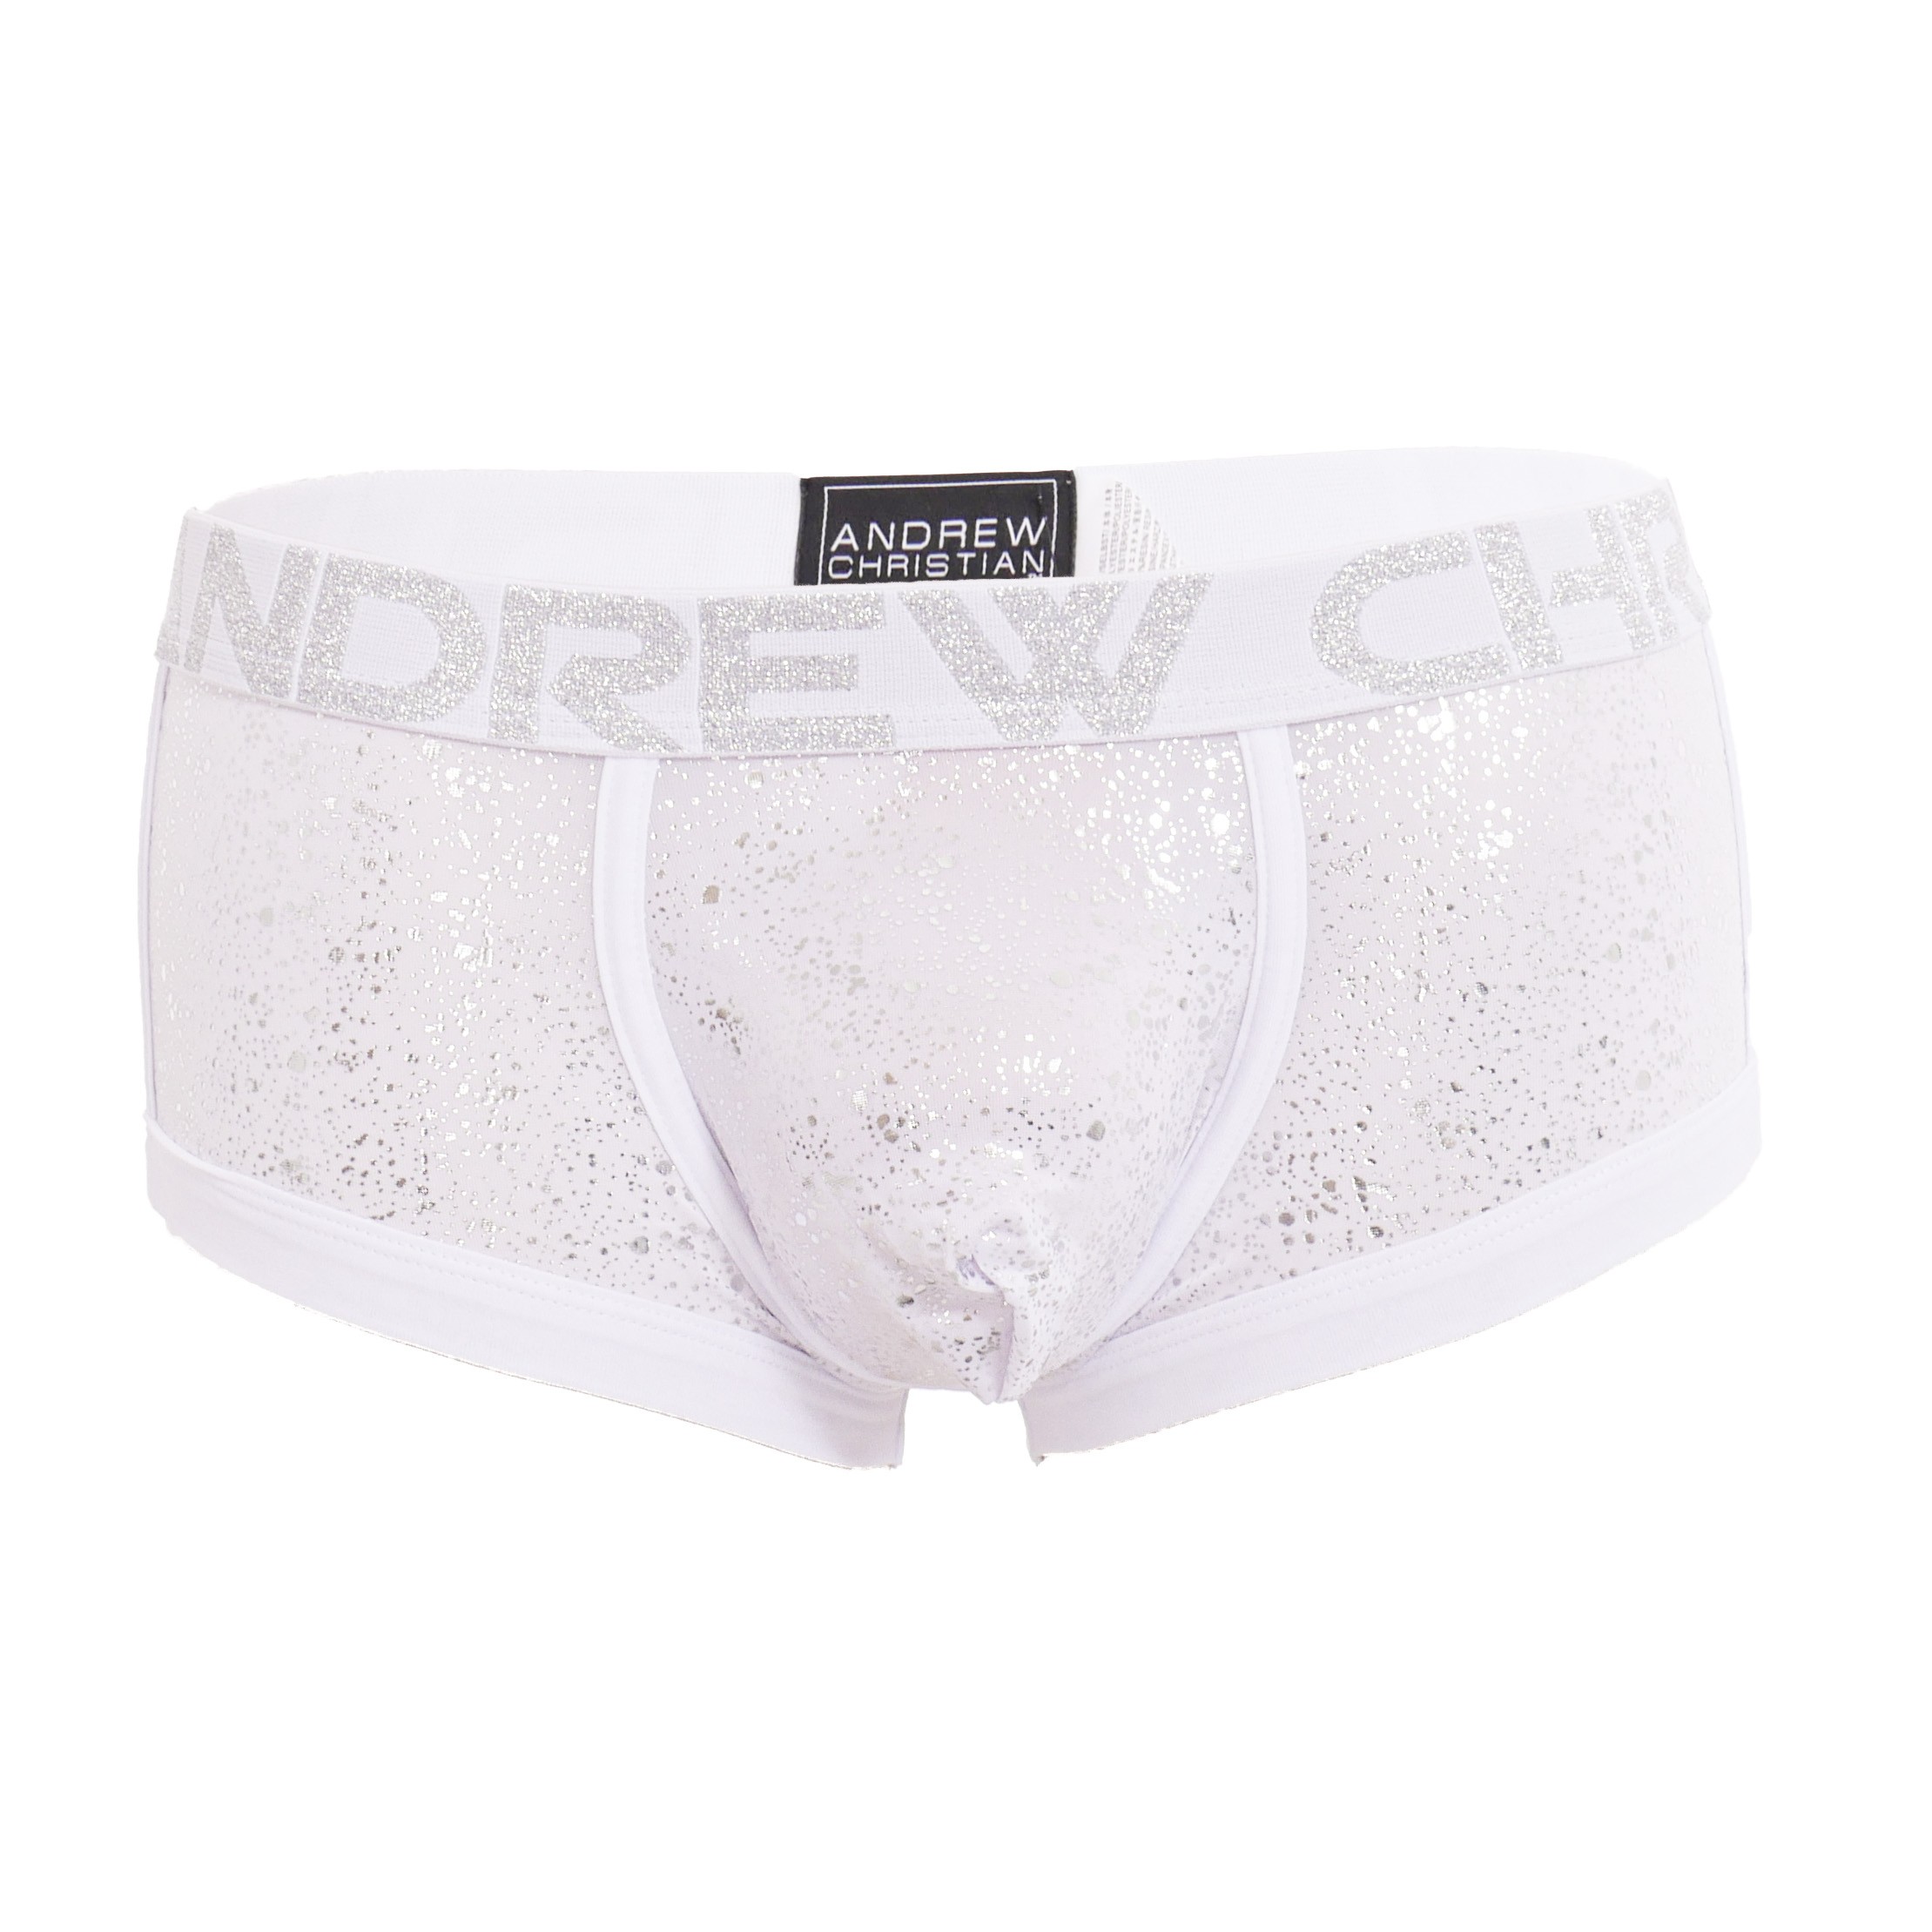 Boxer Snow Sheer w/ Almost Naked: Boxers for man brand Andrew